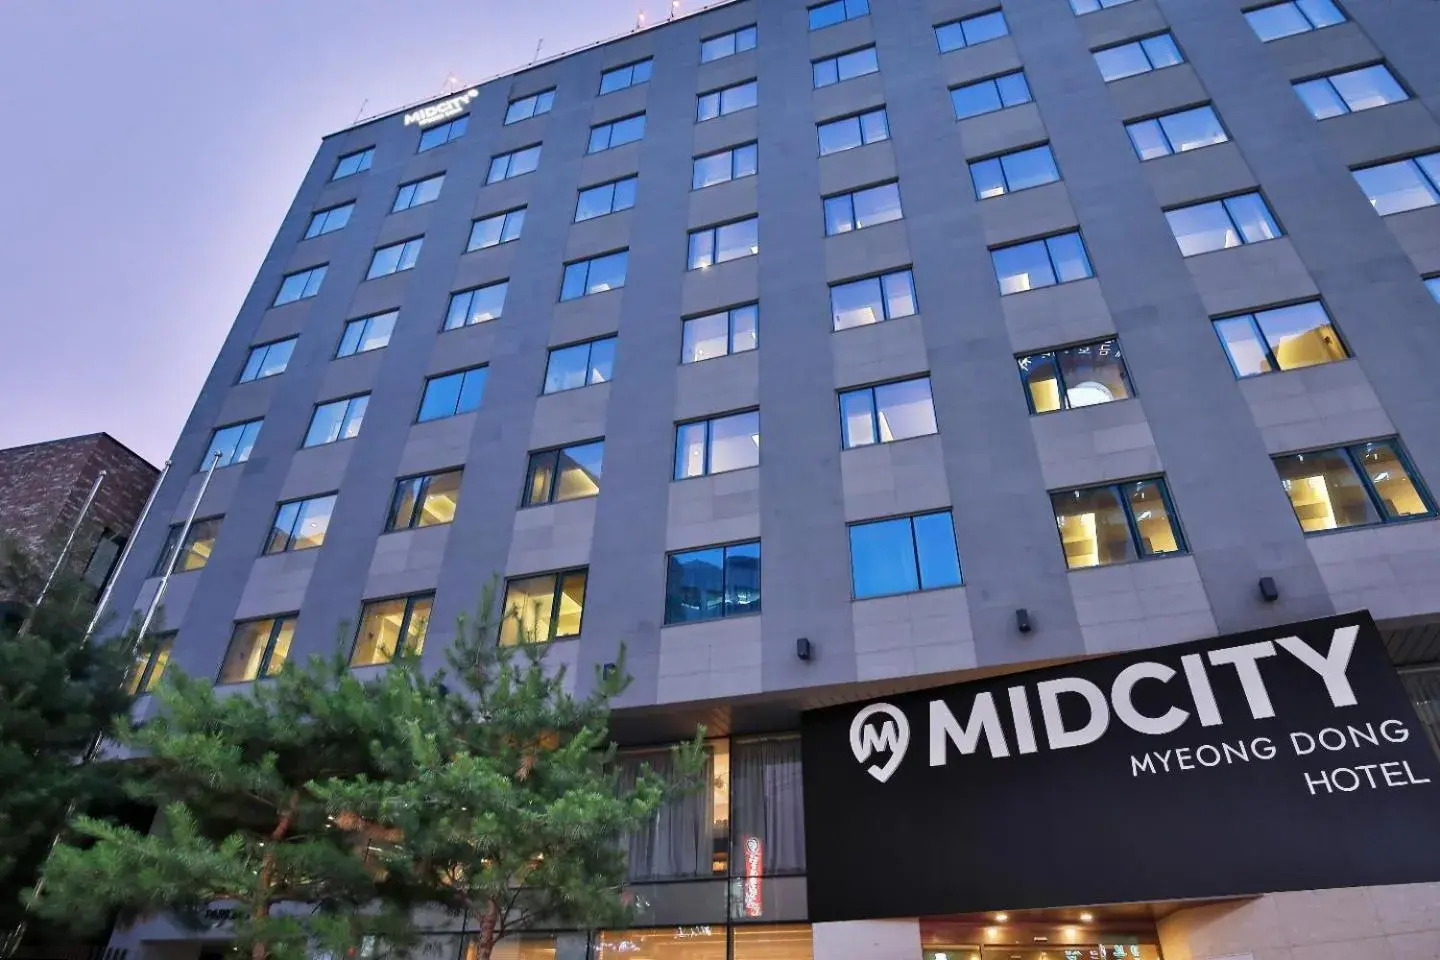 Property Building in Hotel Midcity Myeongdong